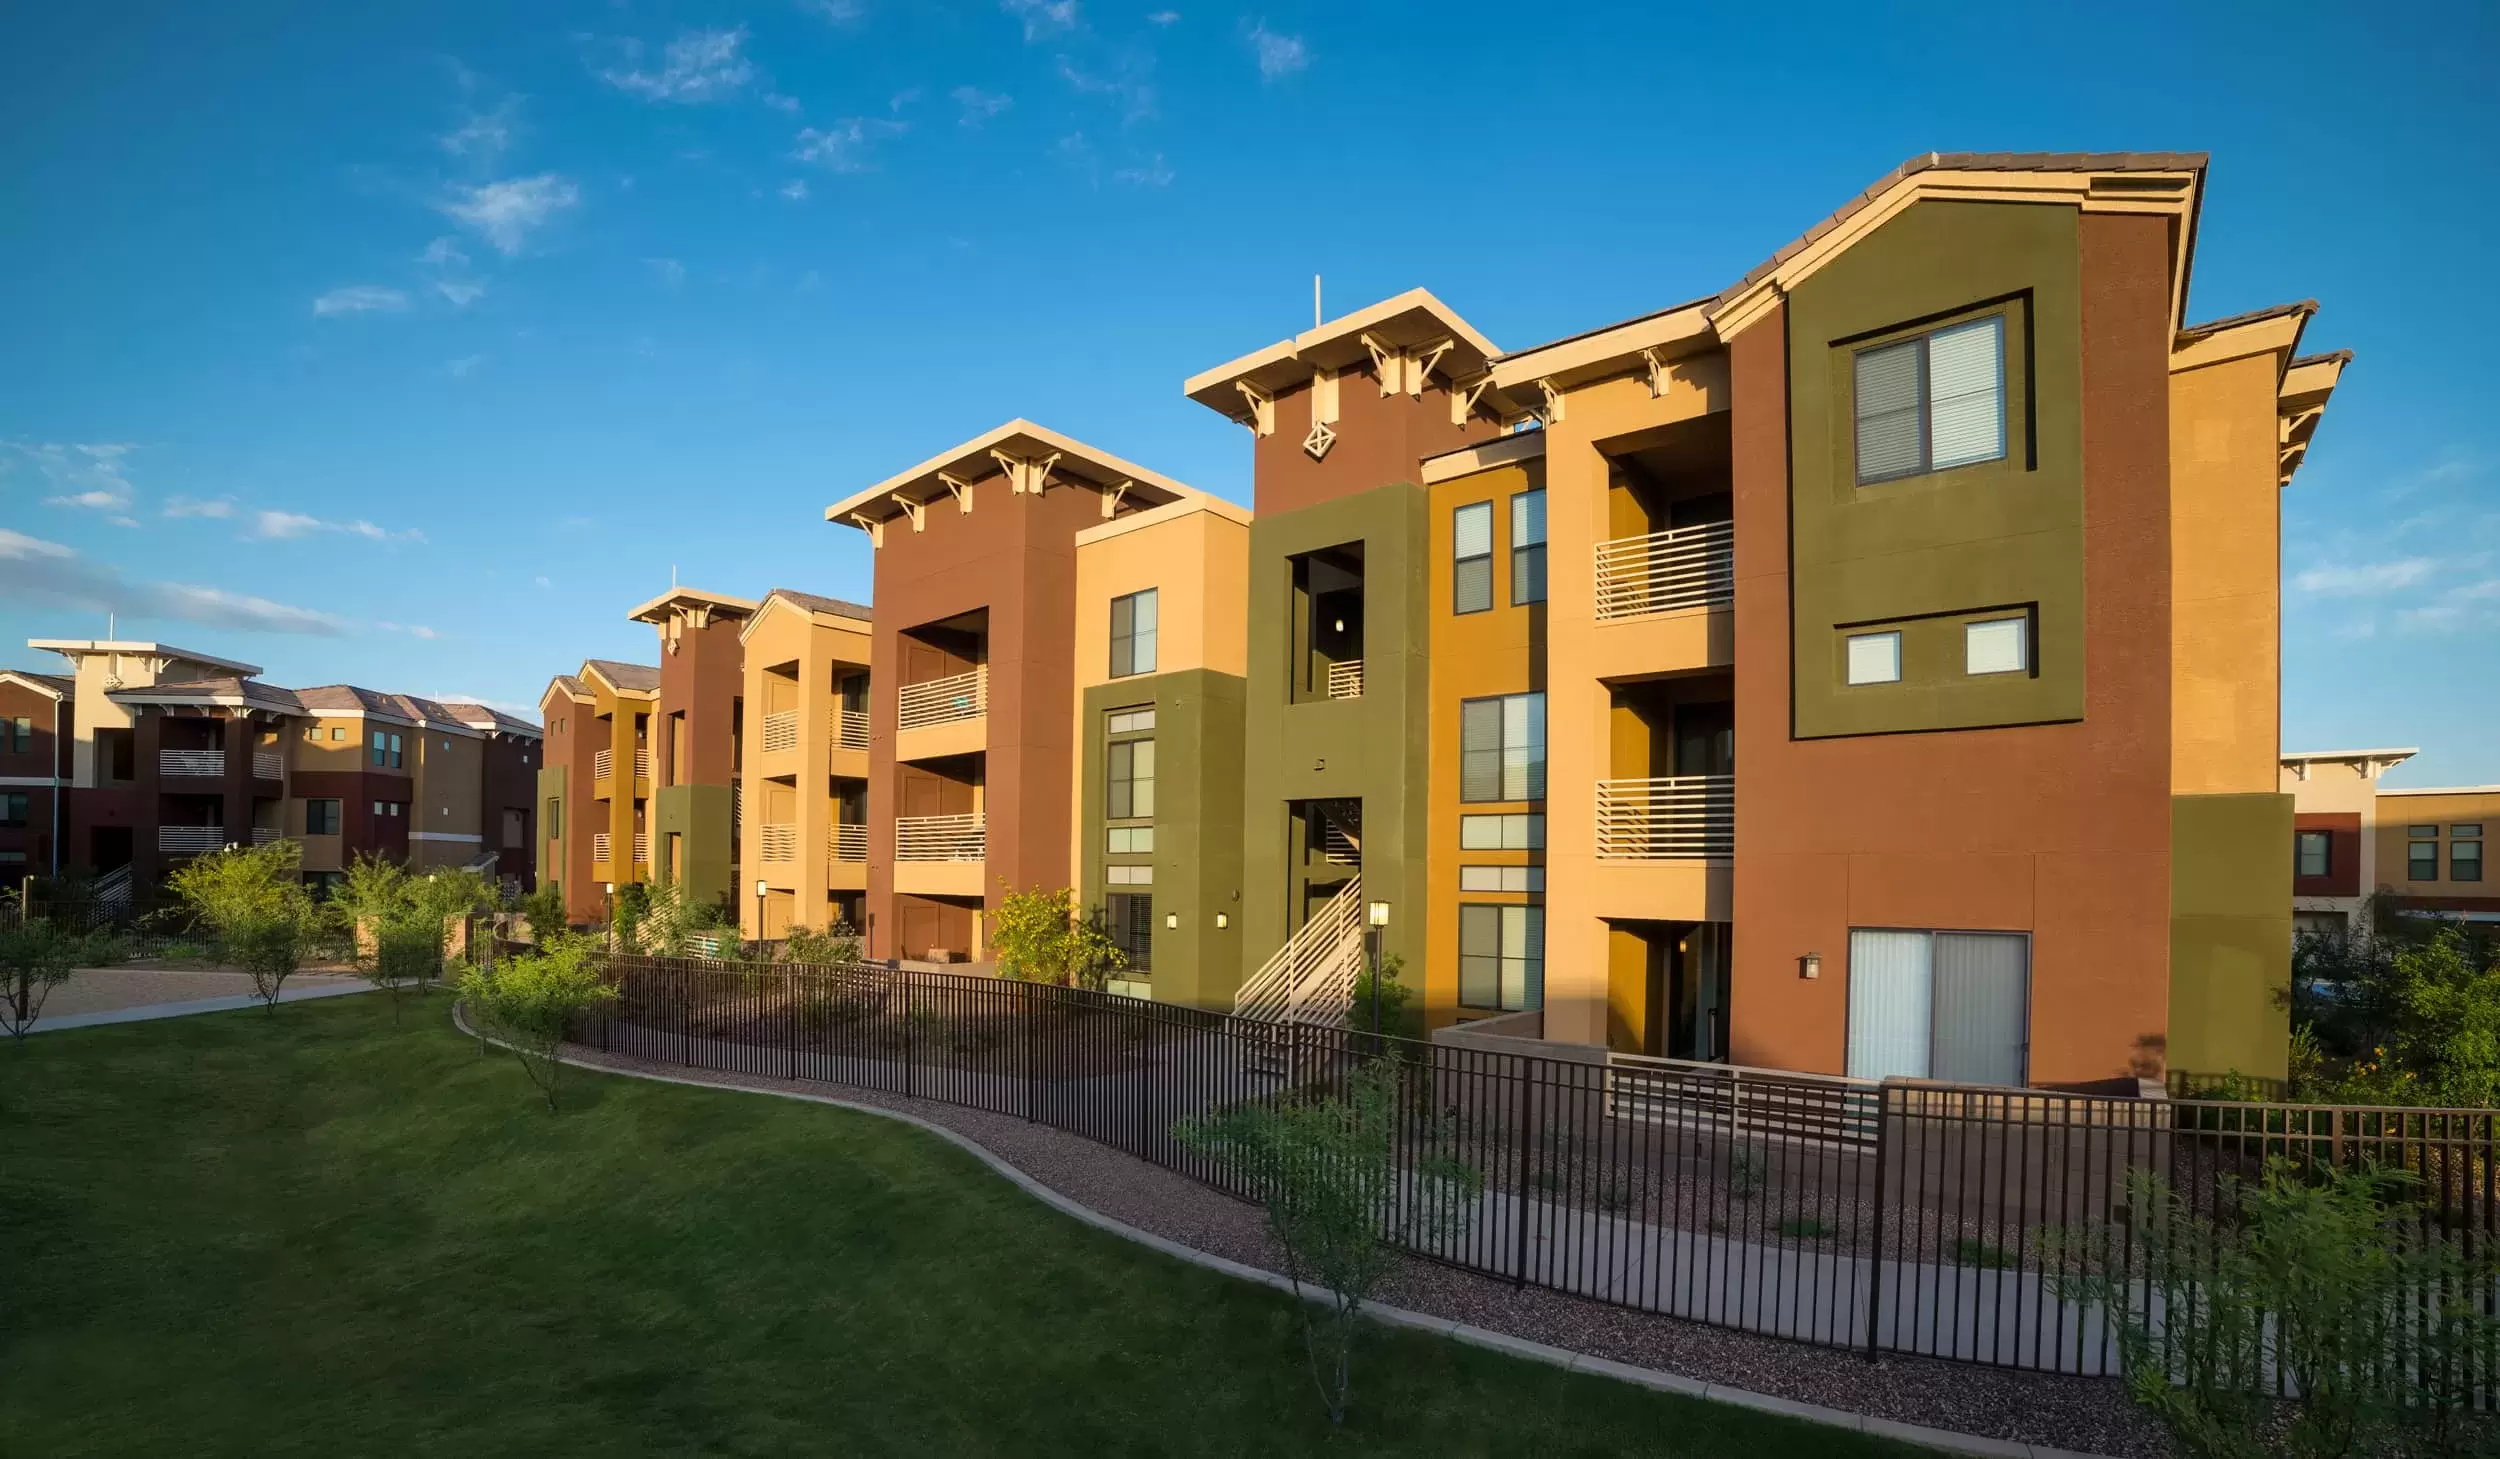 Grass, trees, and a sidewalk wrap around the exterior of the apartment buildings at Liv Ahwatukee.